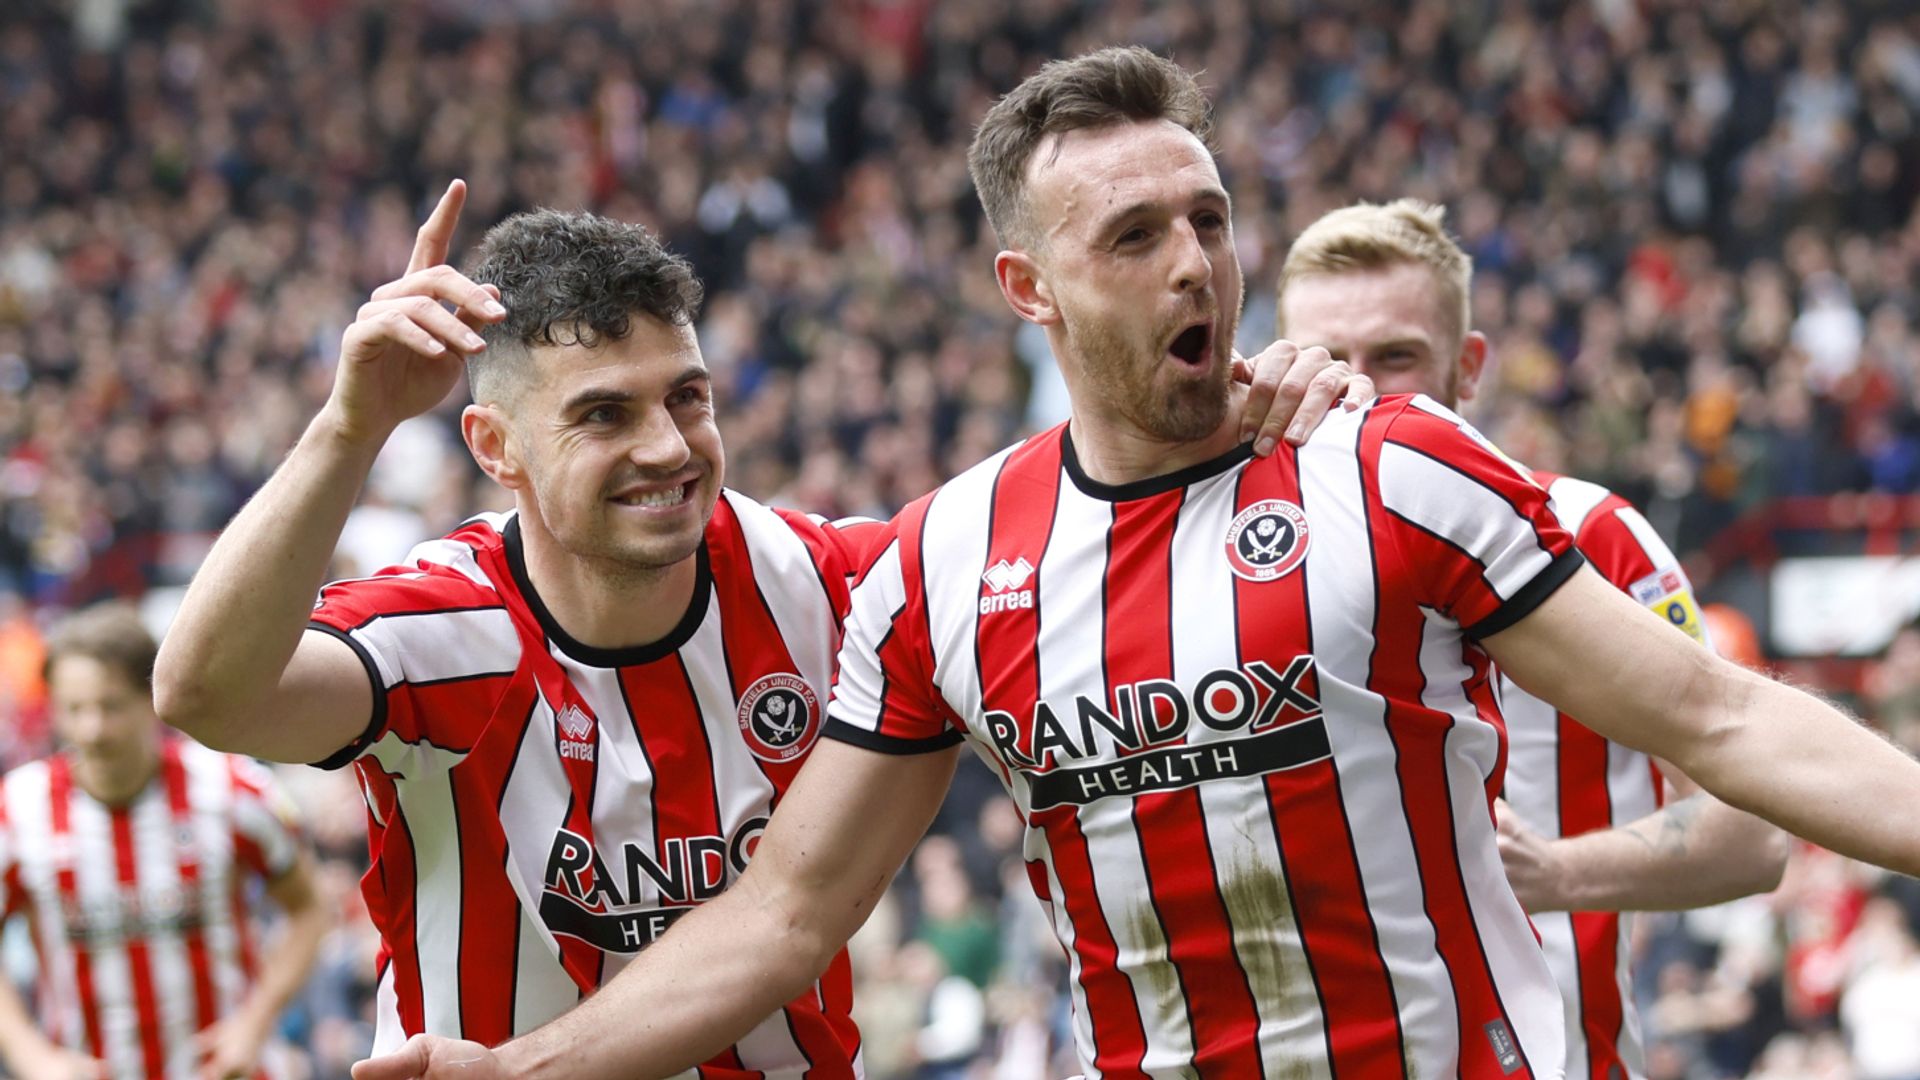 Sheff Utd hit four past Cardiff to inch closer to promotion